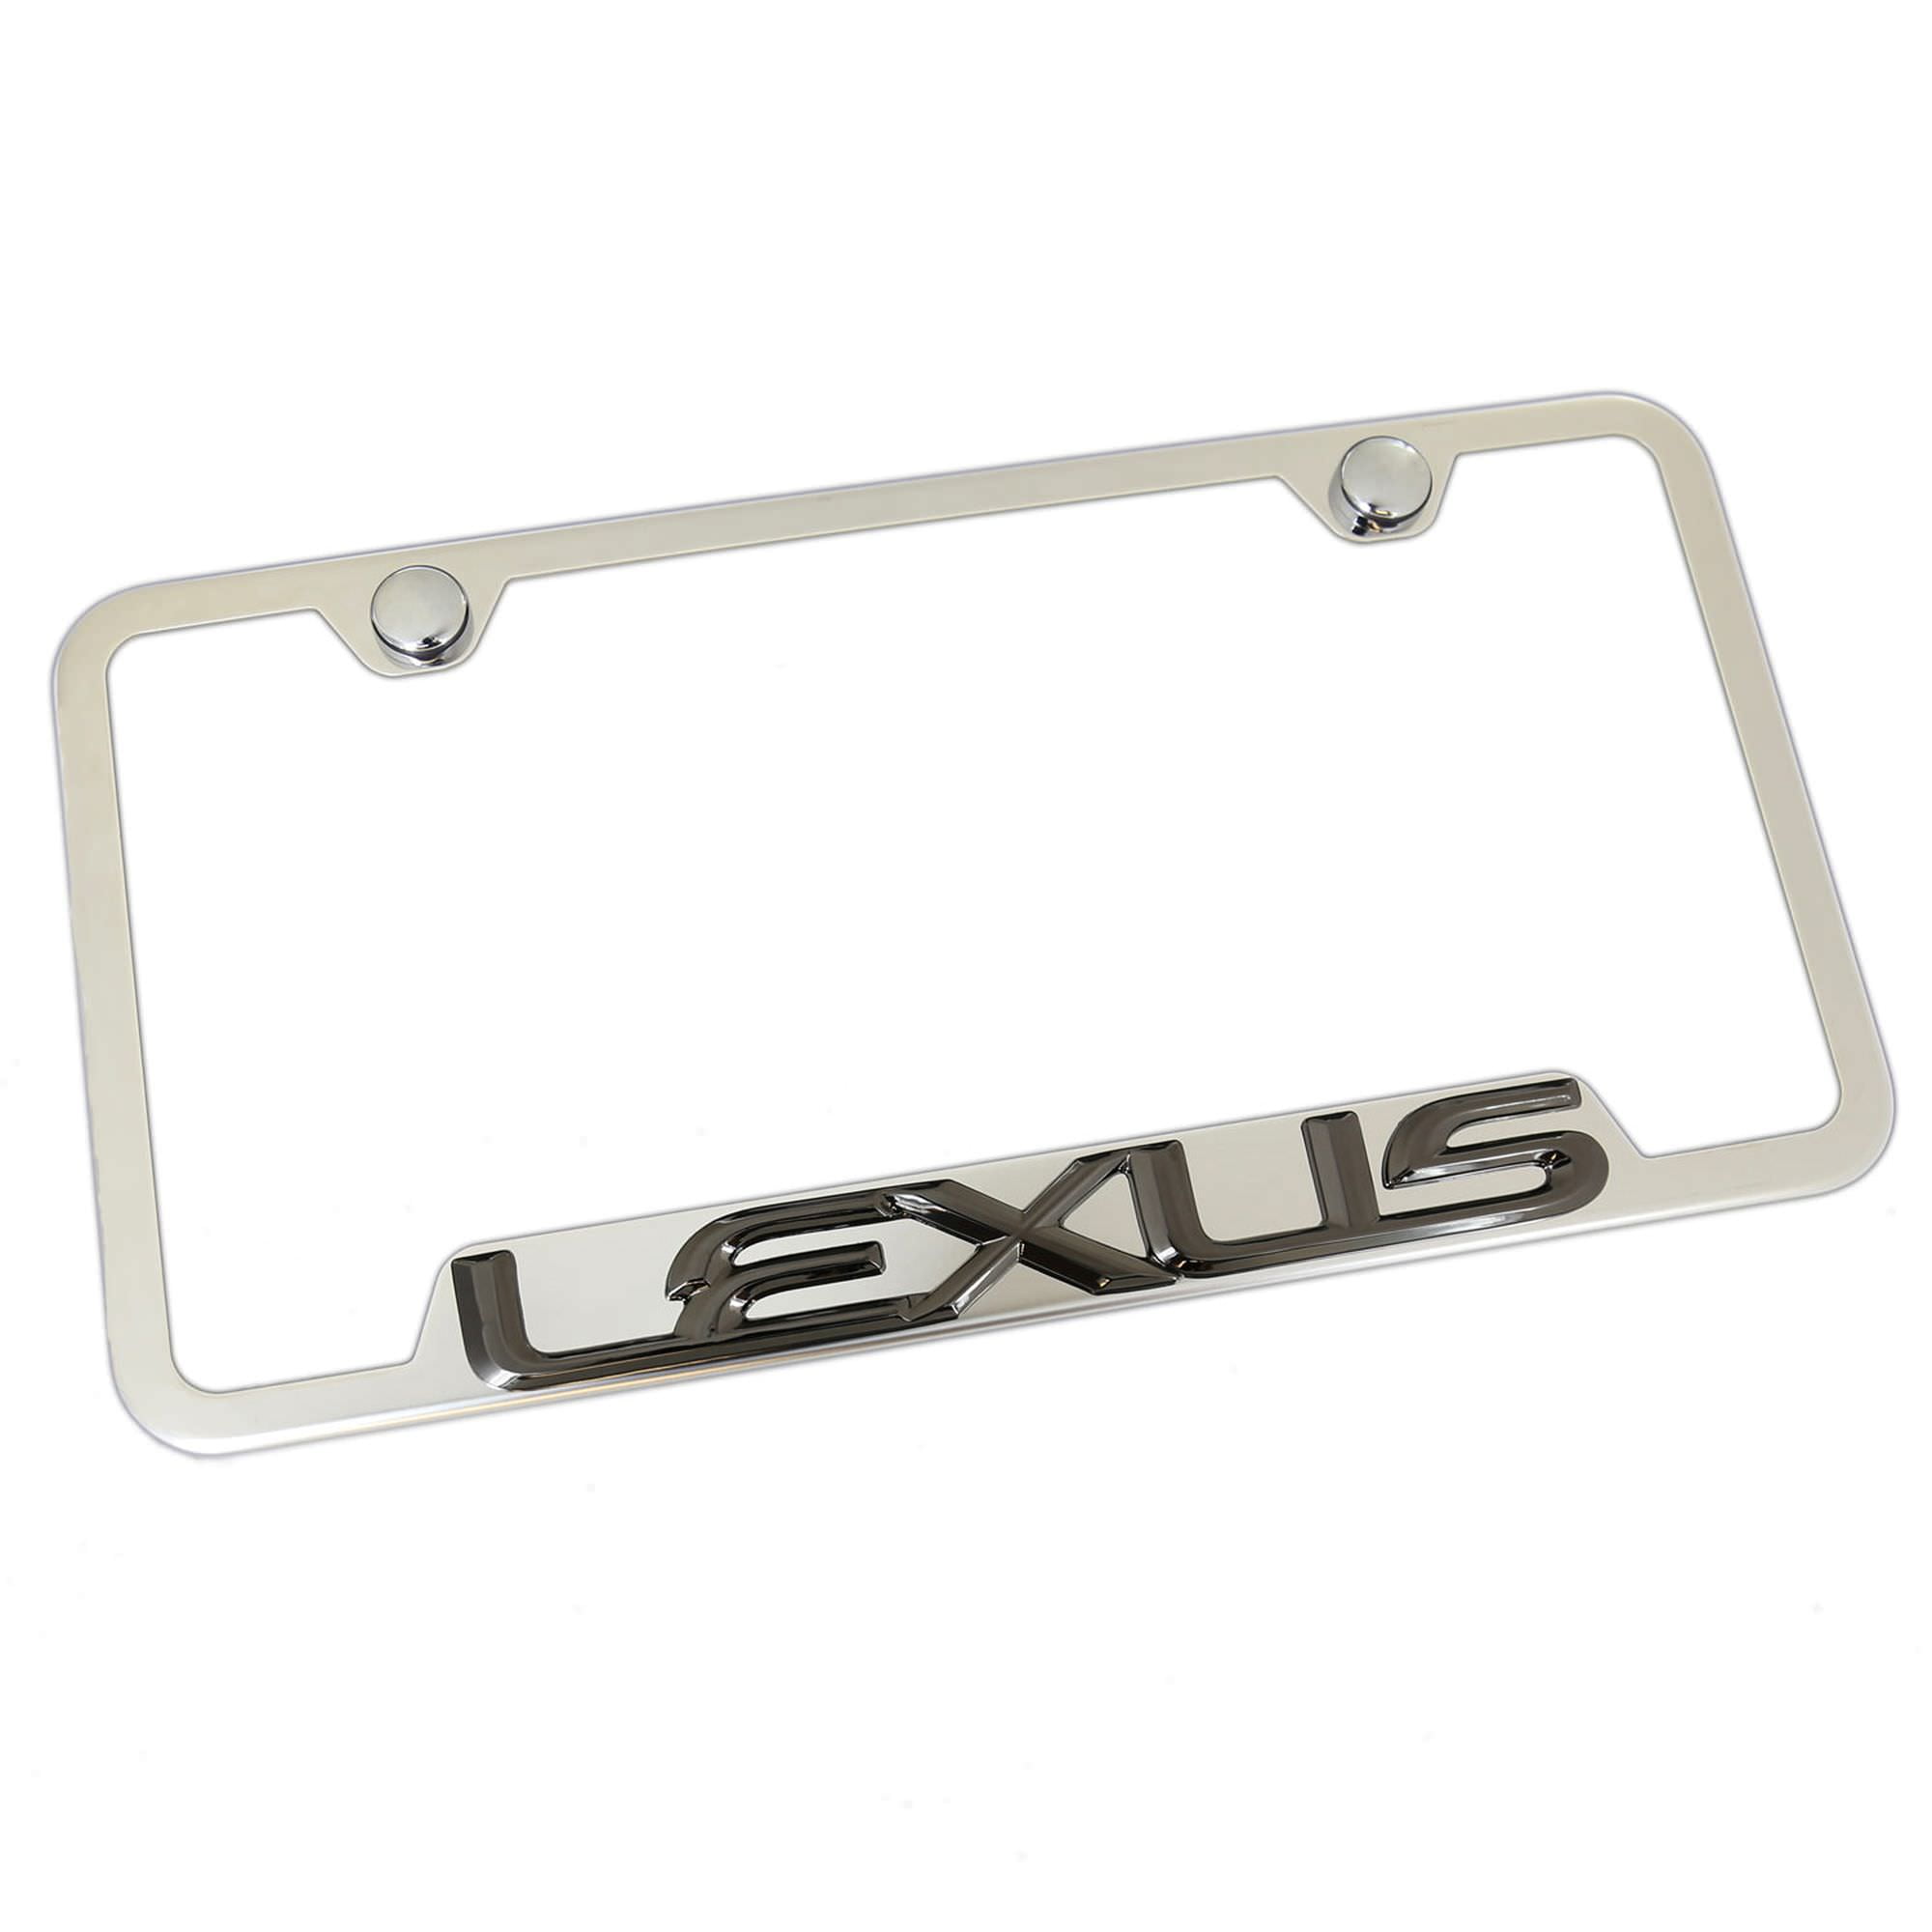 Warehouse Apps Fits for Lexus License Plate Frame 2pcs (Metal)